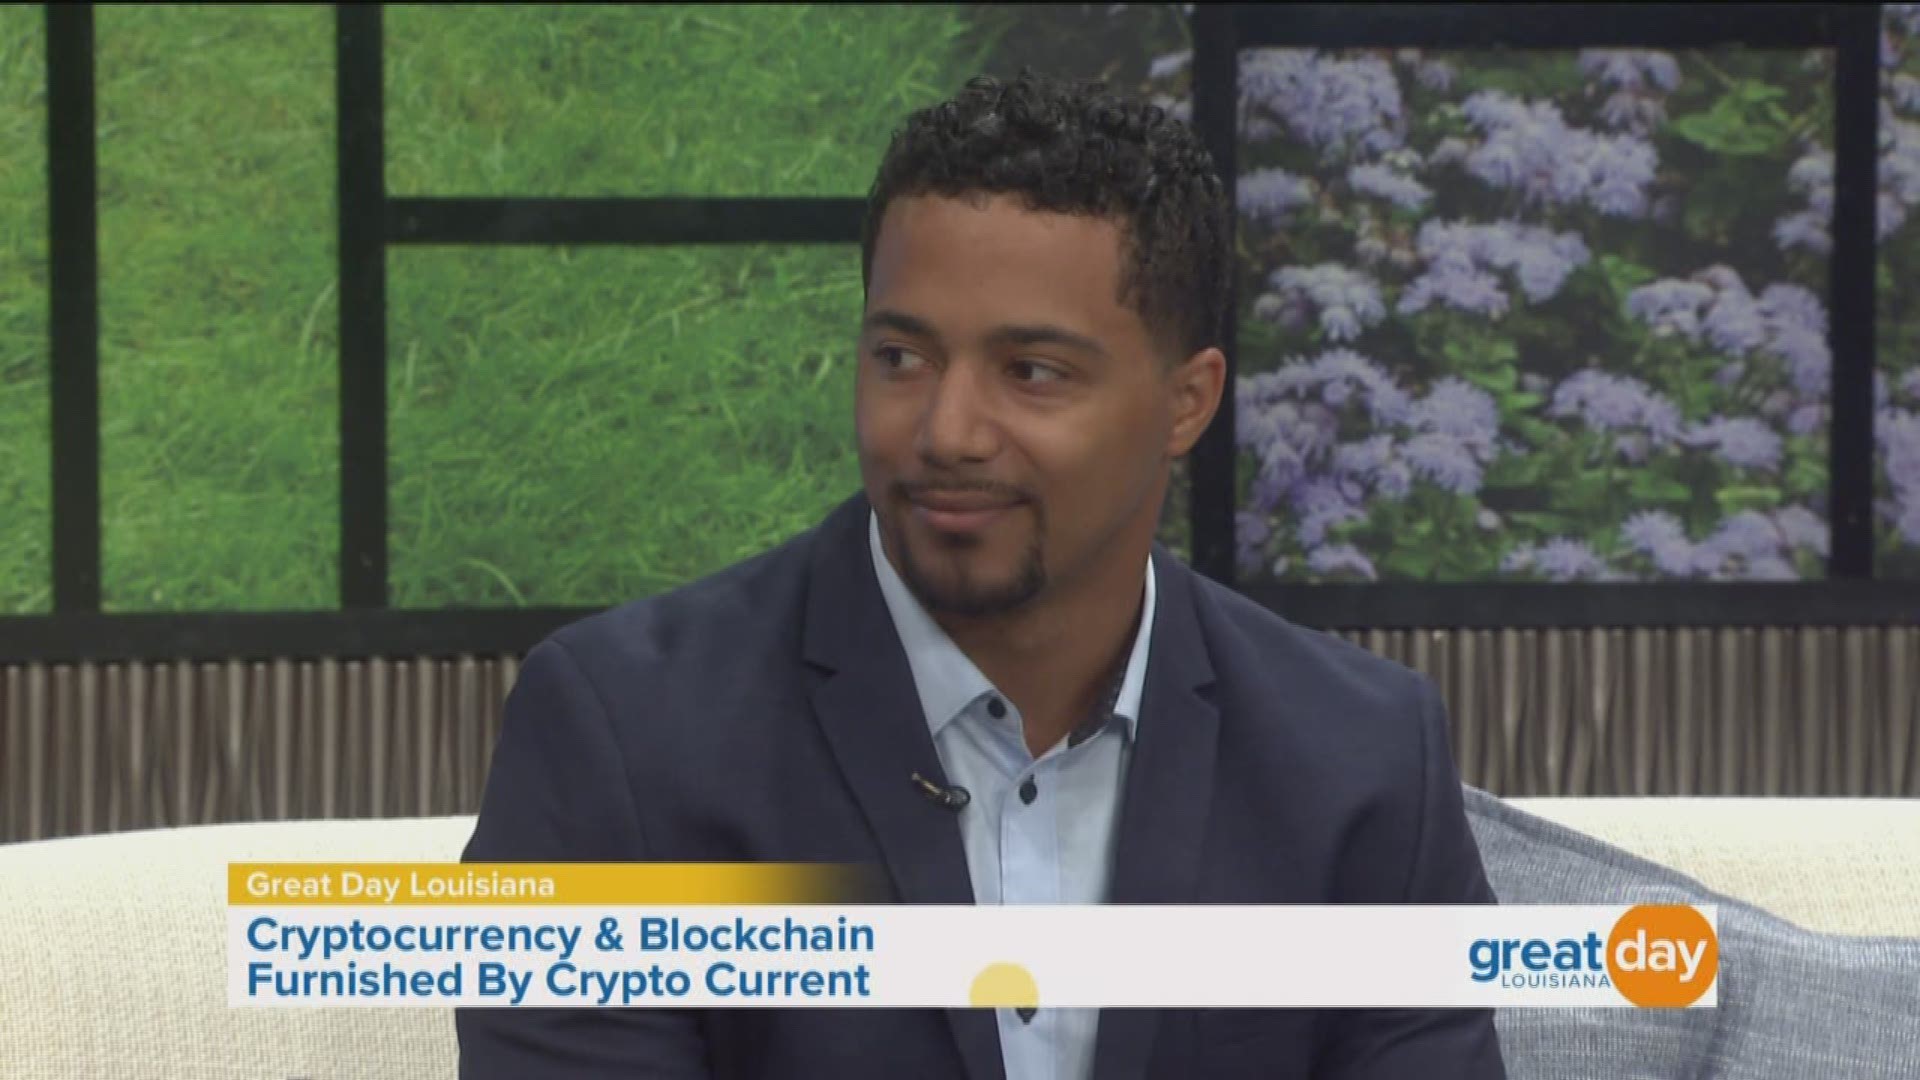 Richard Carthon, of Crypto Current, is here to tell us all about Cryptocurrency & Blockchain.